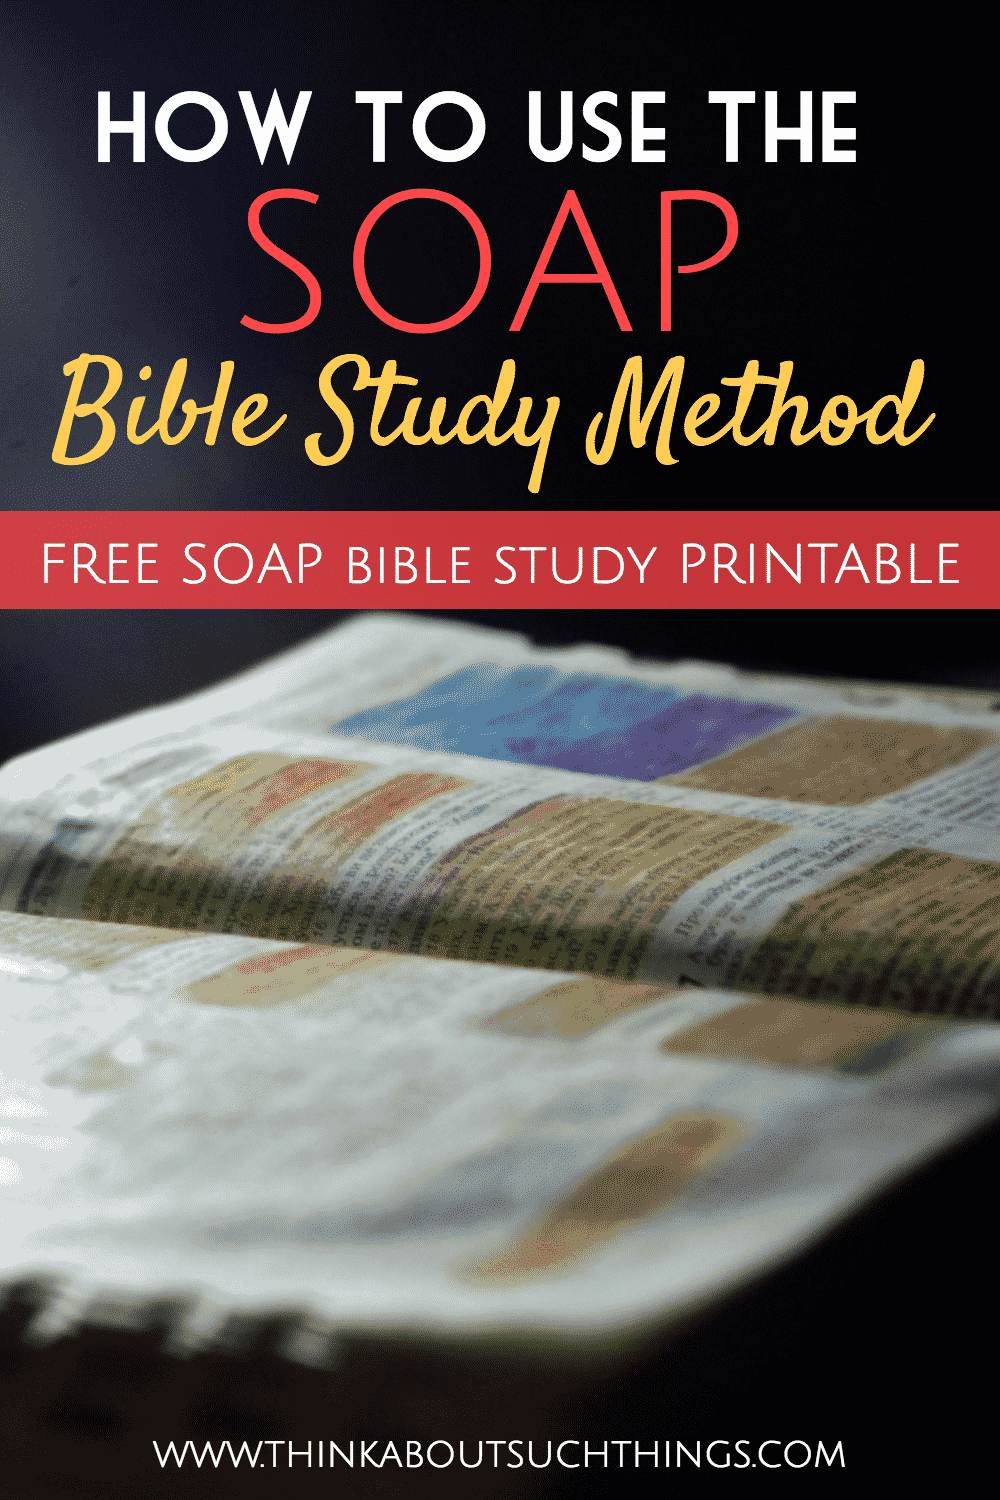 the-soap-bible-study-method-done-easy-think-about-such-things